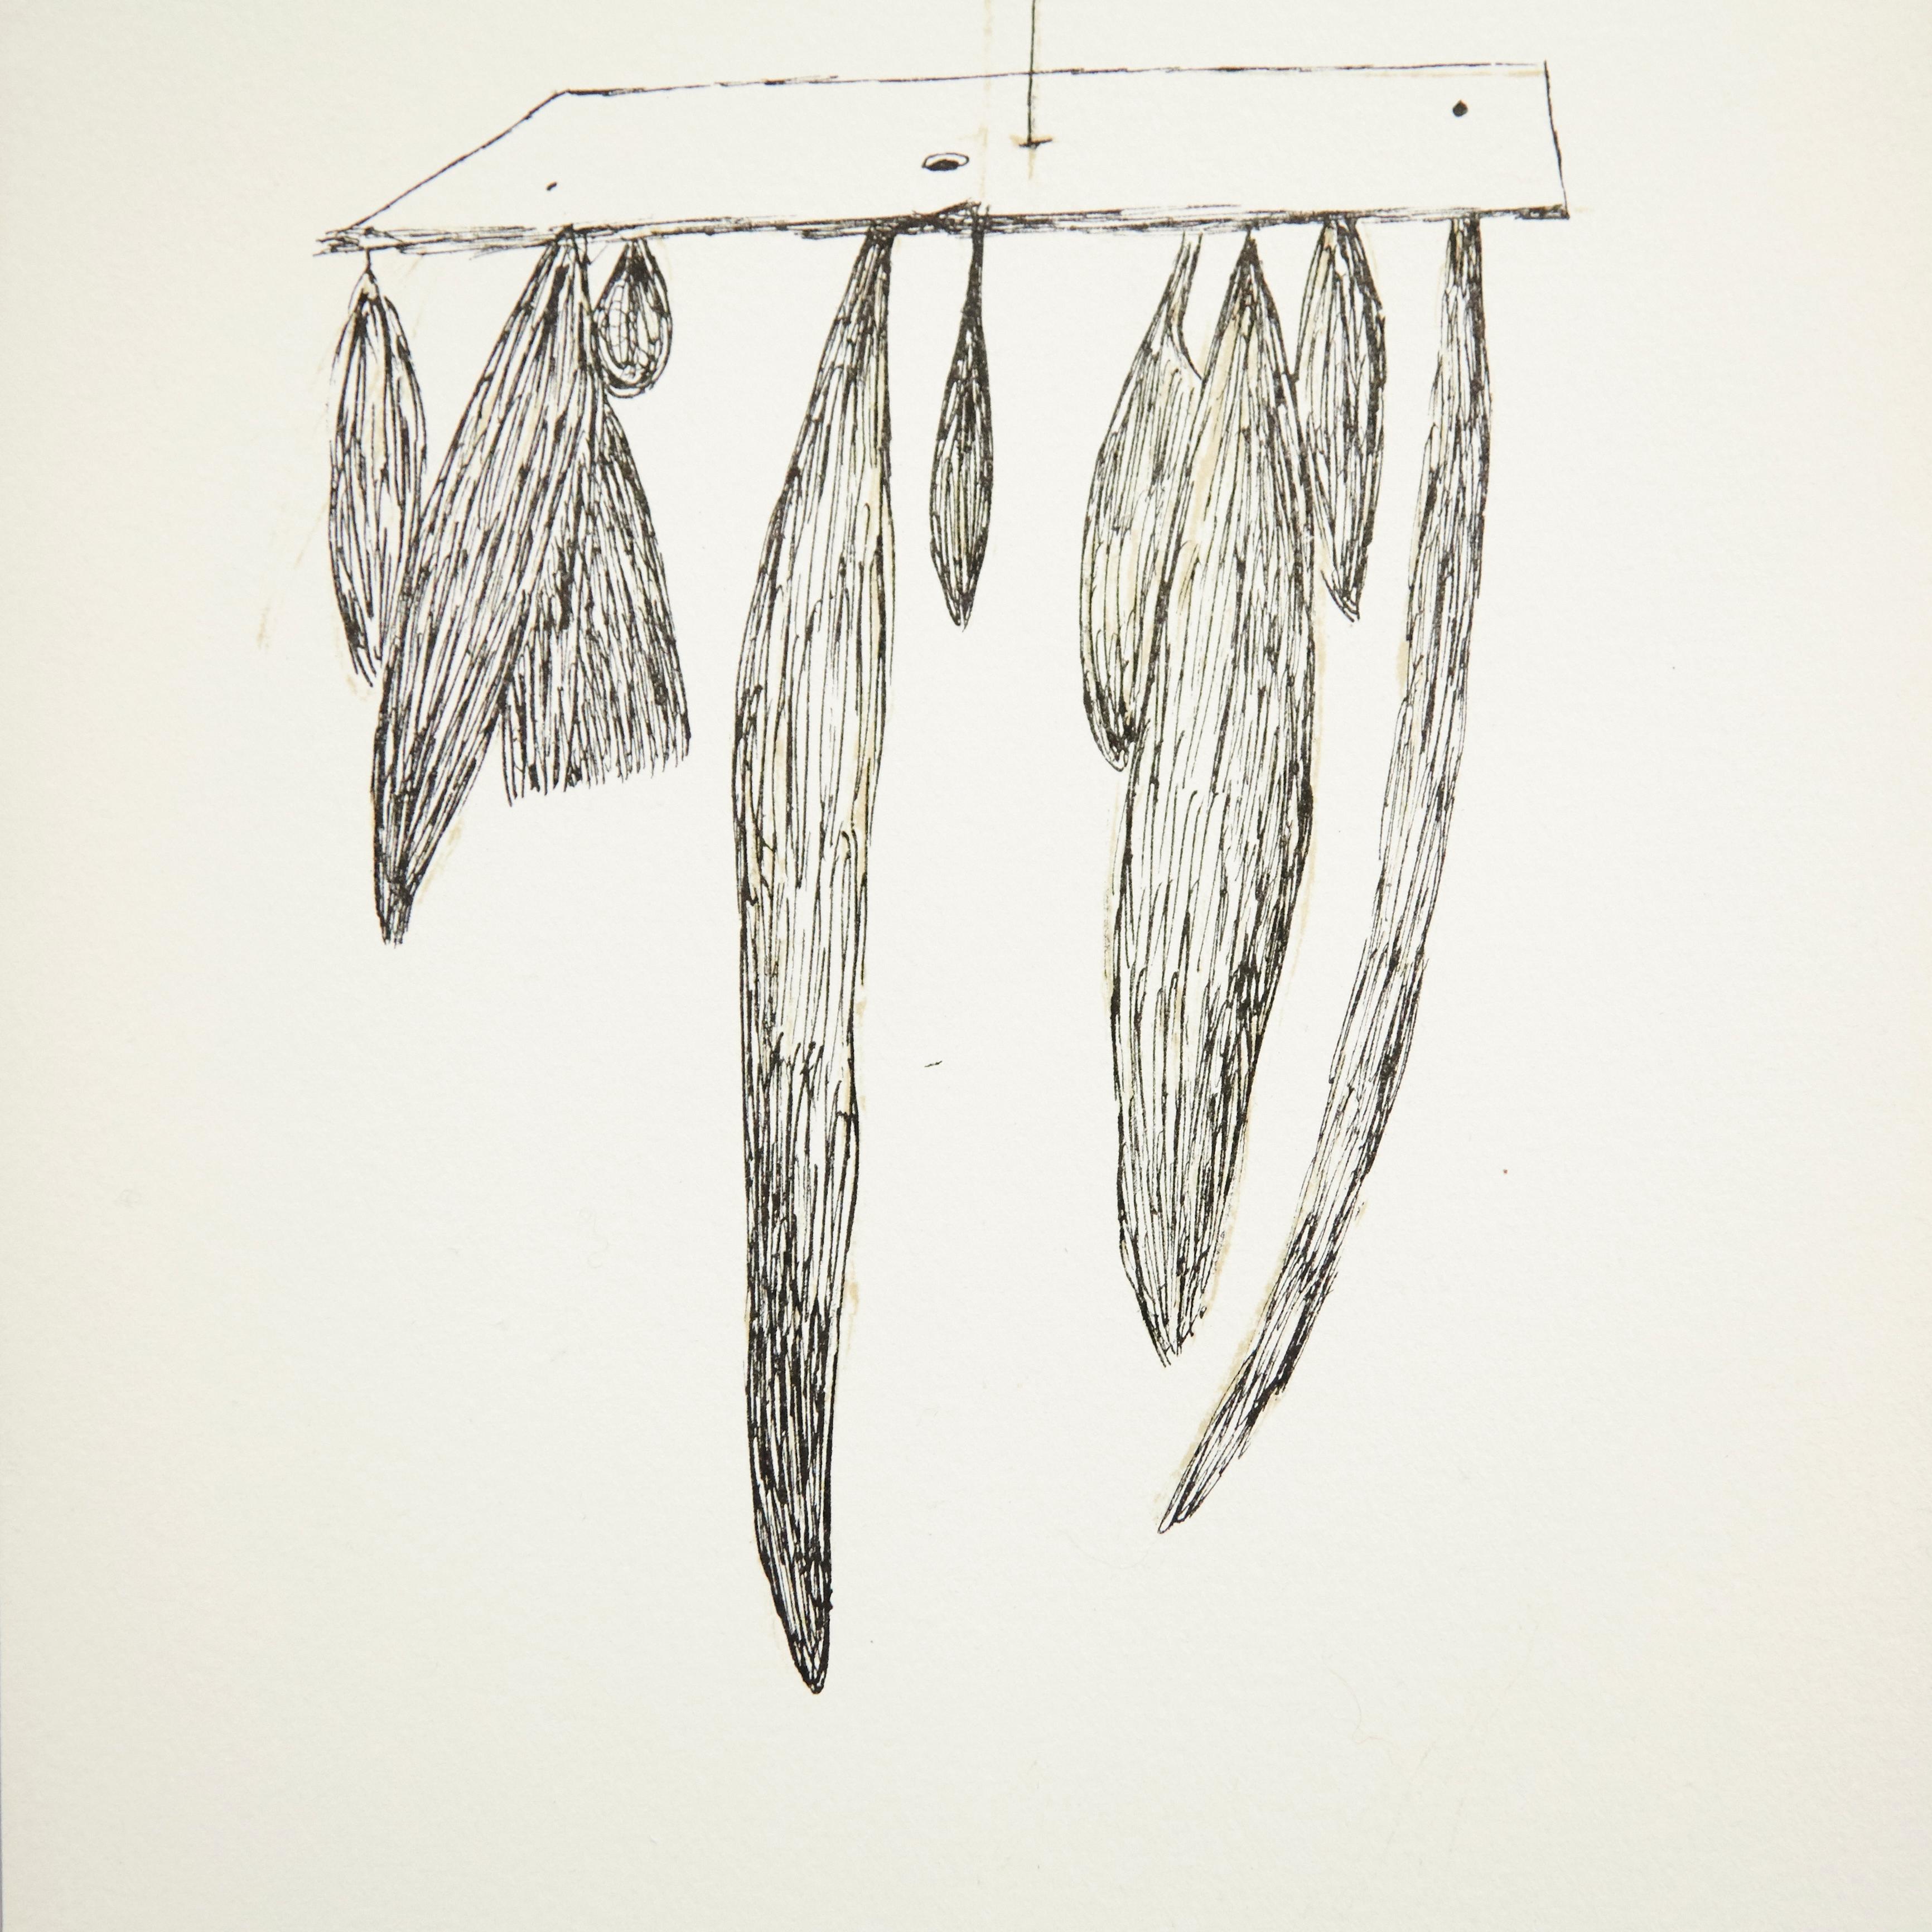 Lithography by Louise Bourgeois, circa 1980.
Signed on the stone.

In good original condition.

Louise Joséphine Bourgeois 25 December 1911-31 May 2010 was a French-American artist. Although she is best known for her large-scale sculpture and